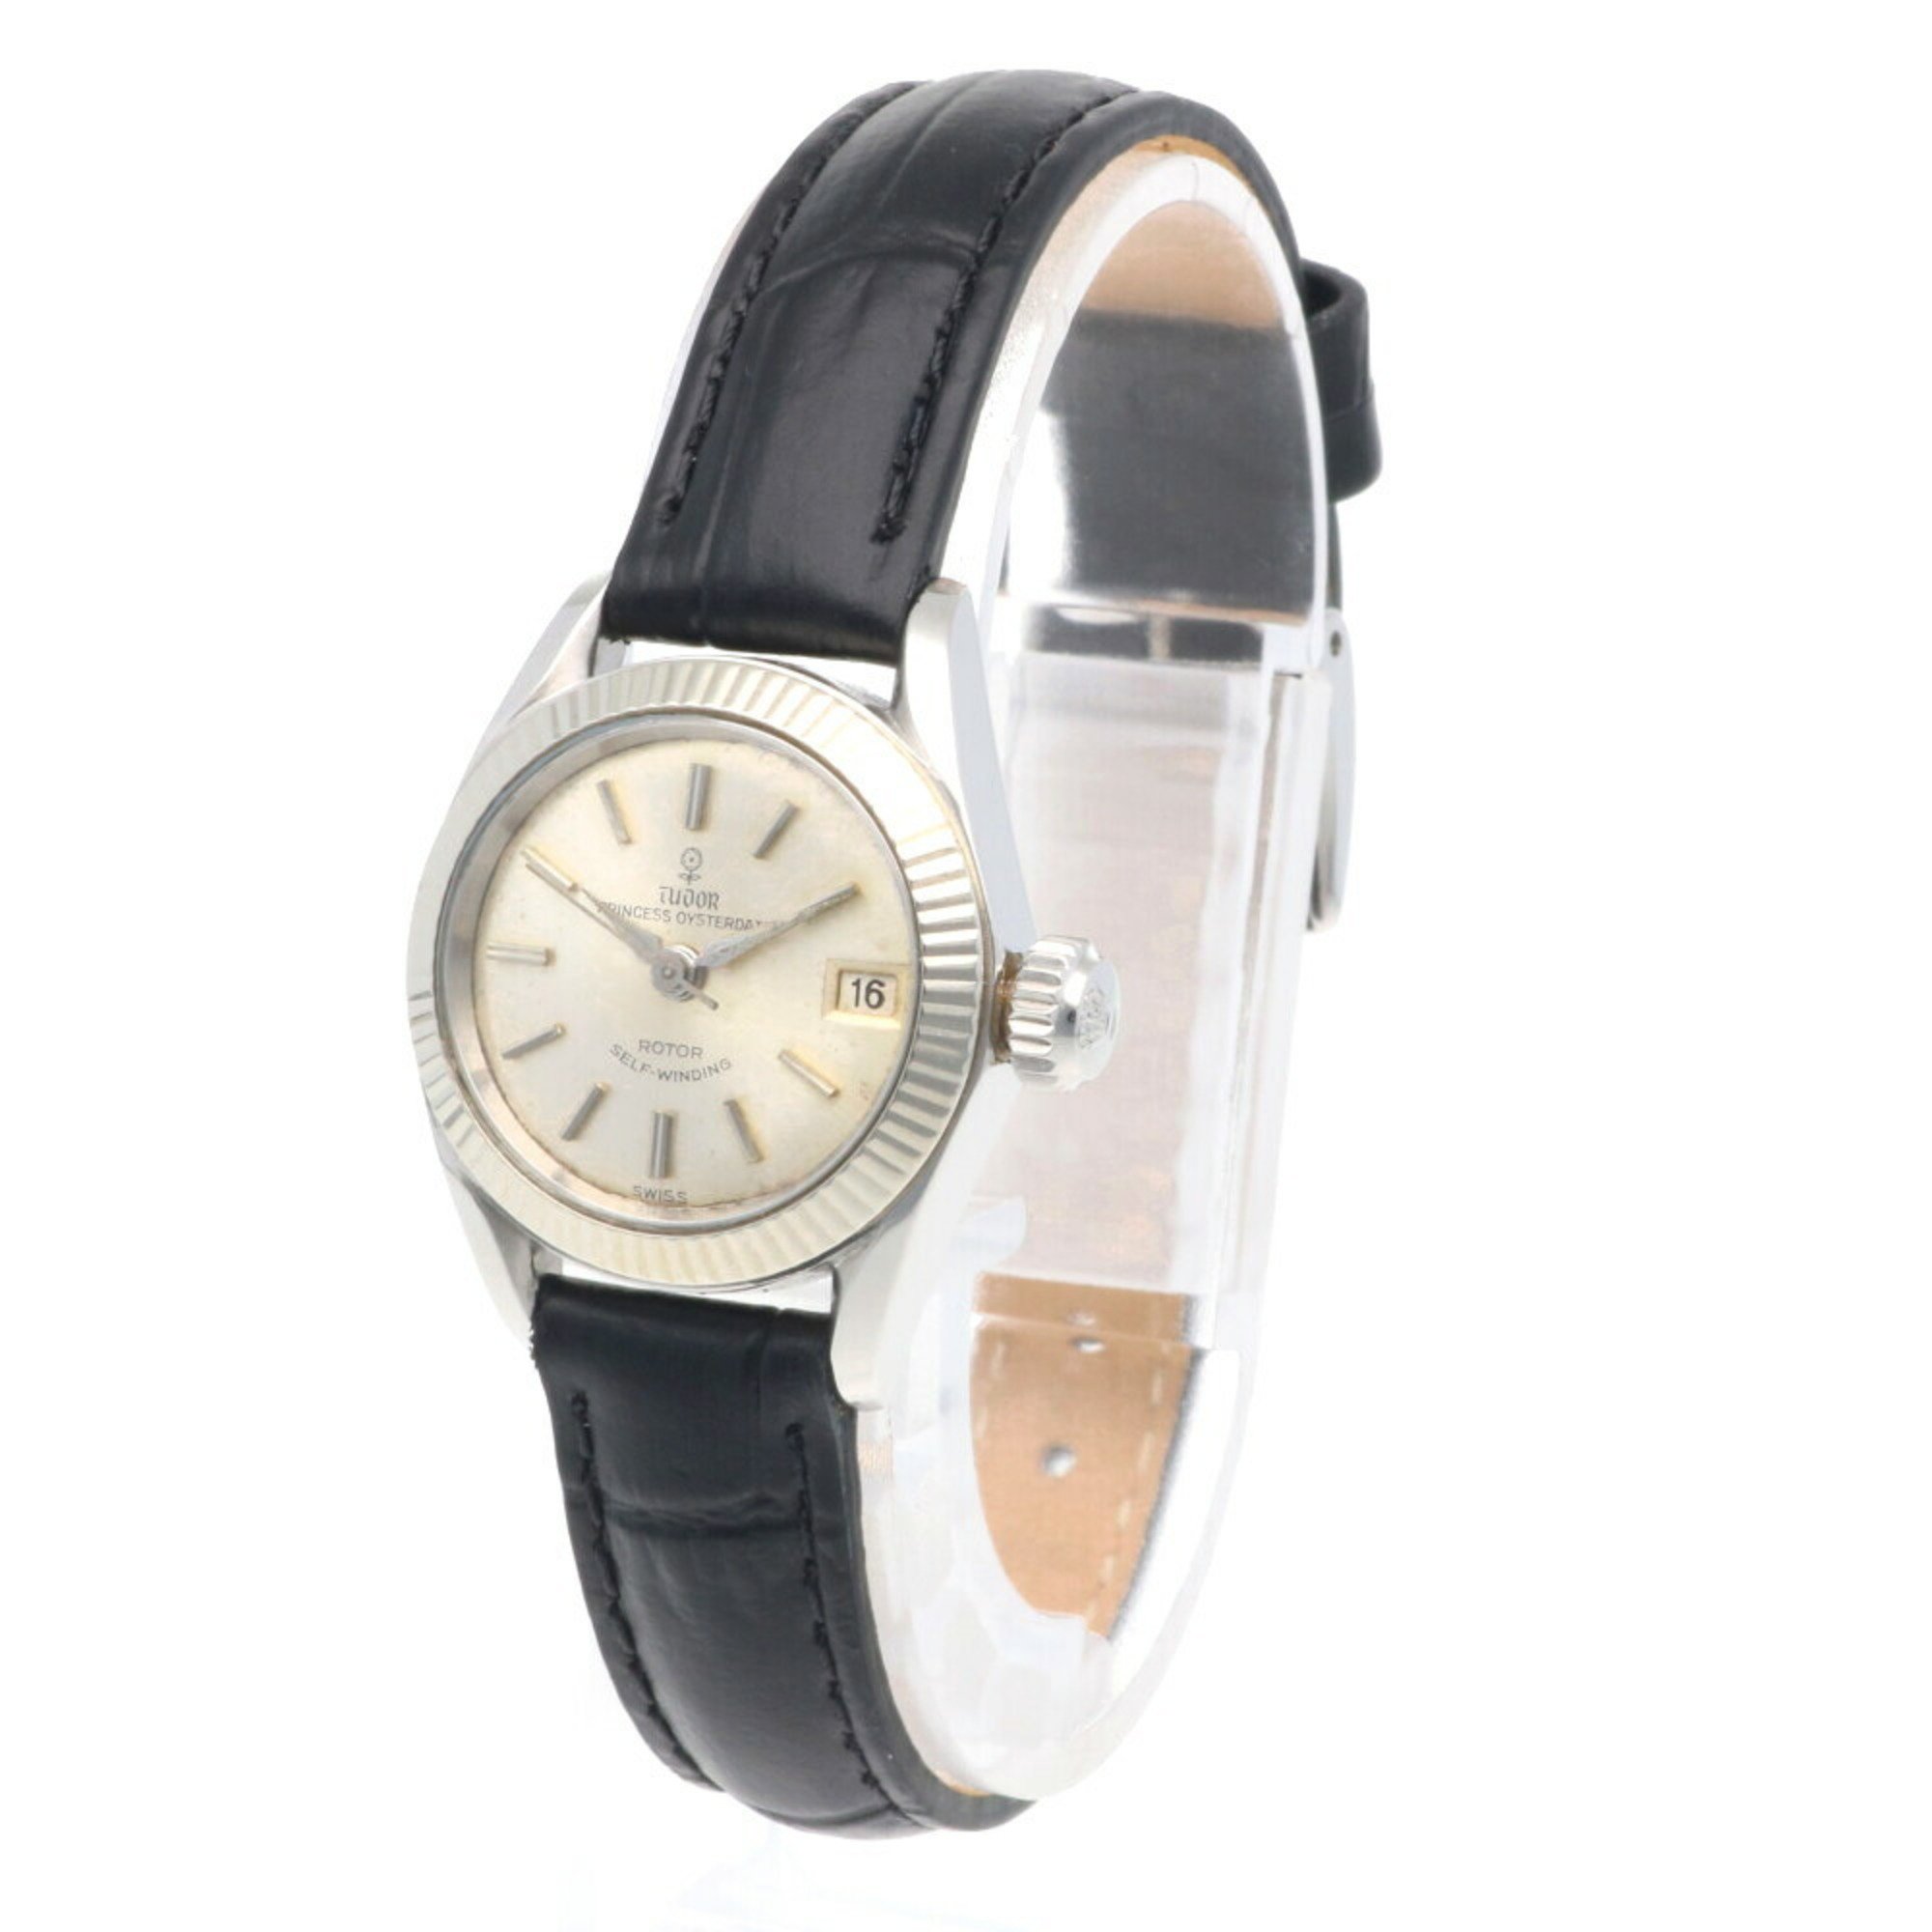 Tudor Princess Oyster Date Watch Stainless Steel 7981 Automatic Ladies TUDOR Overhauled